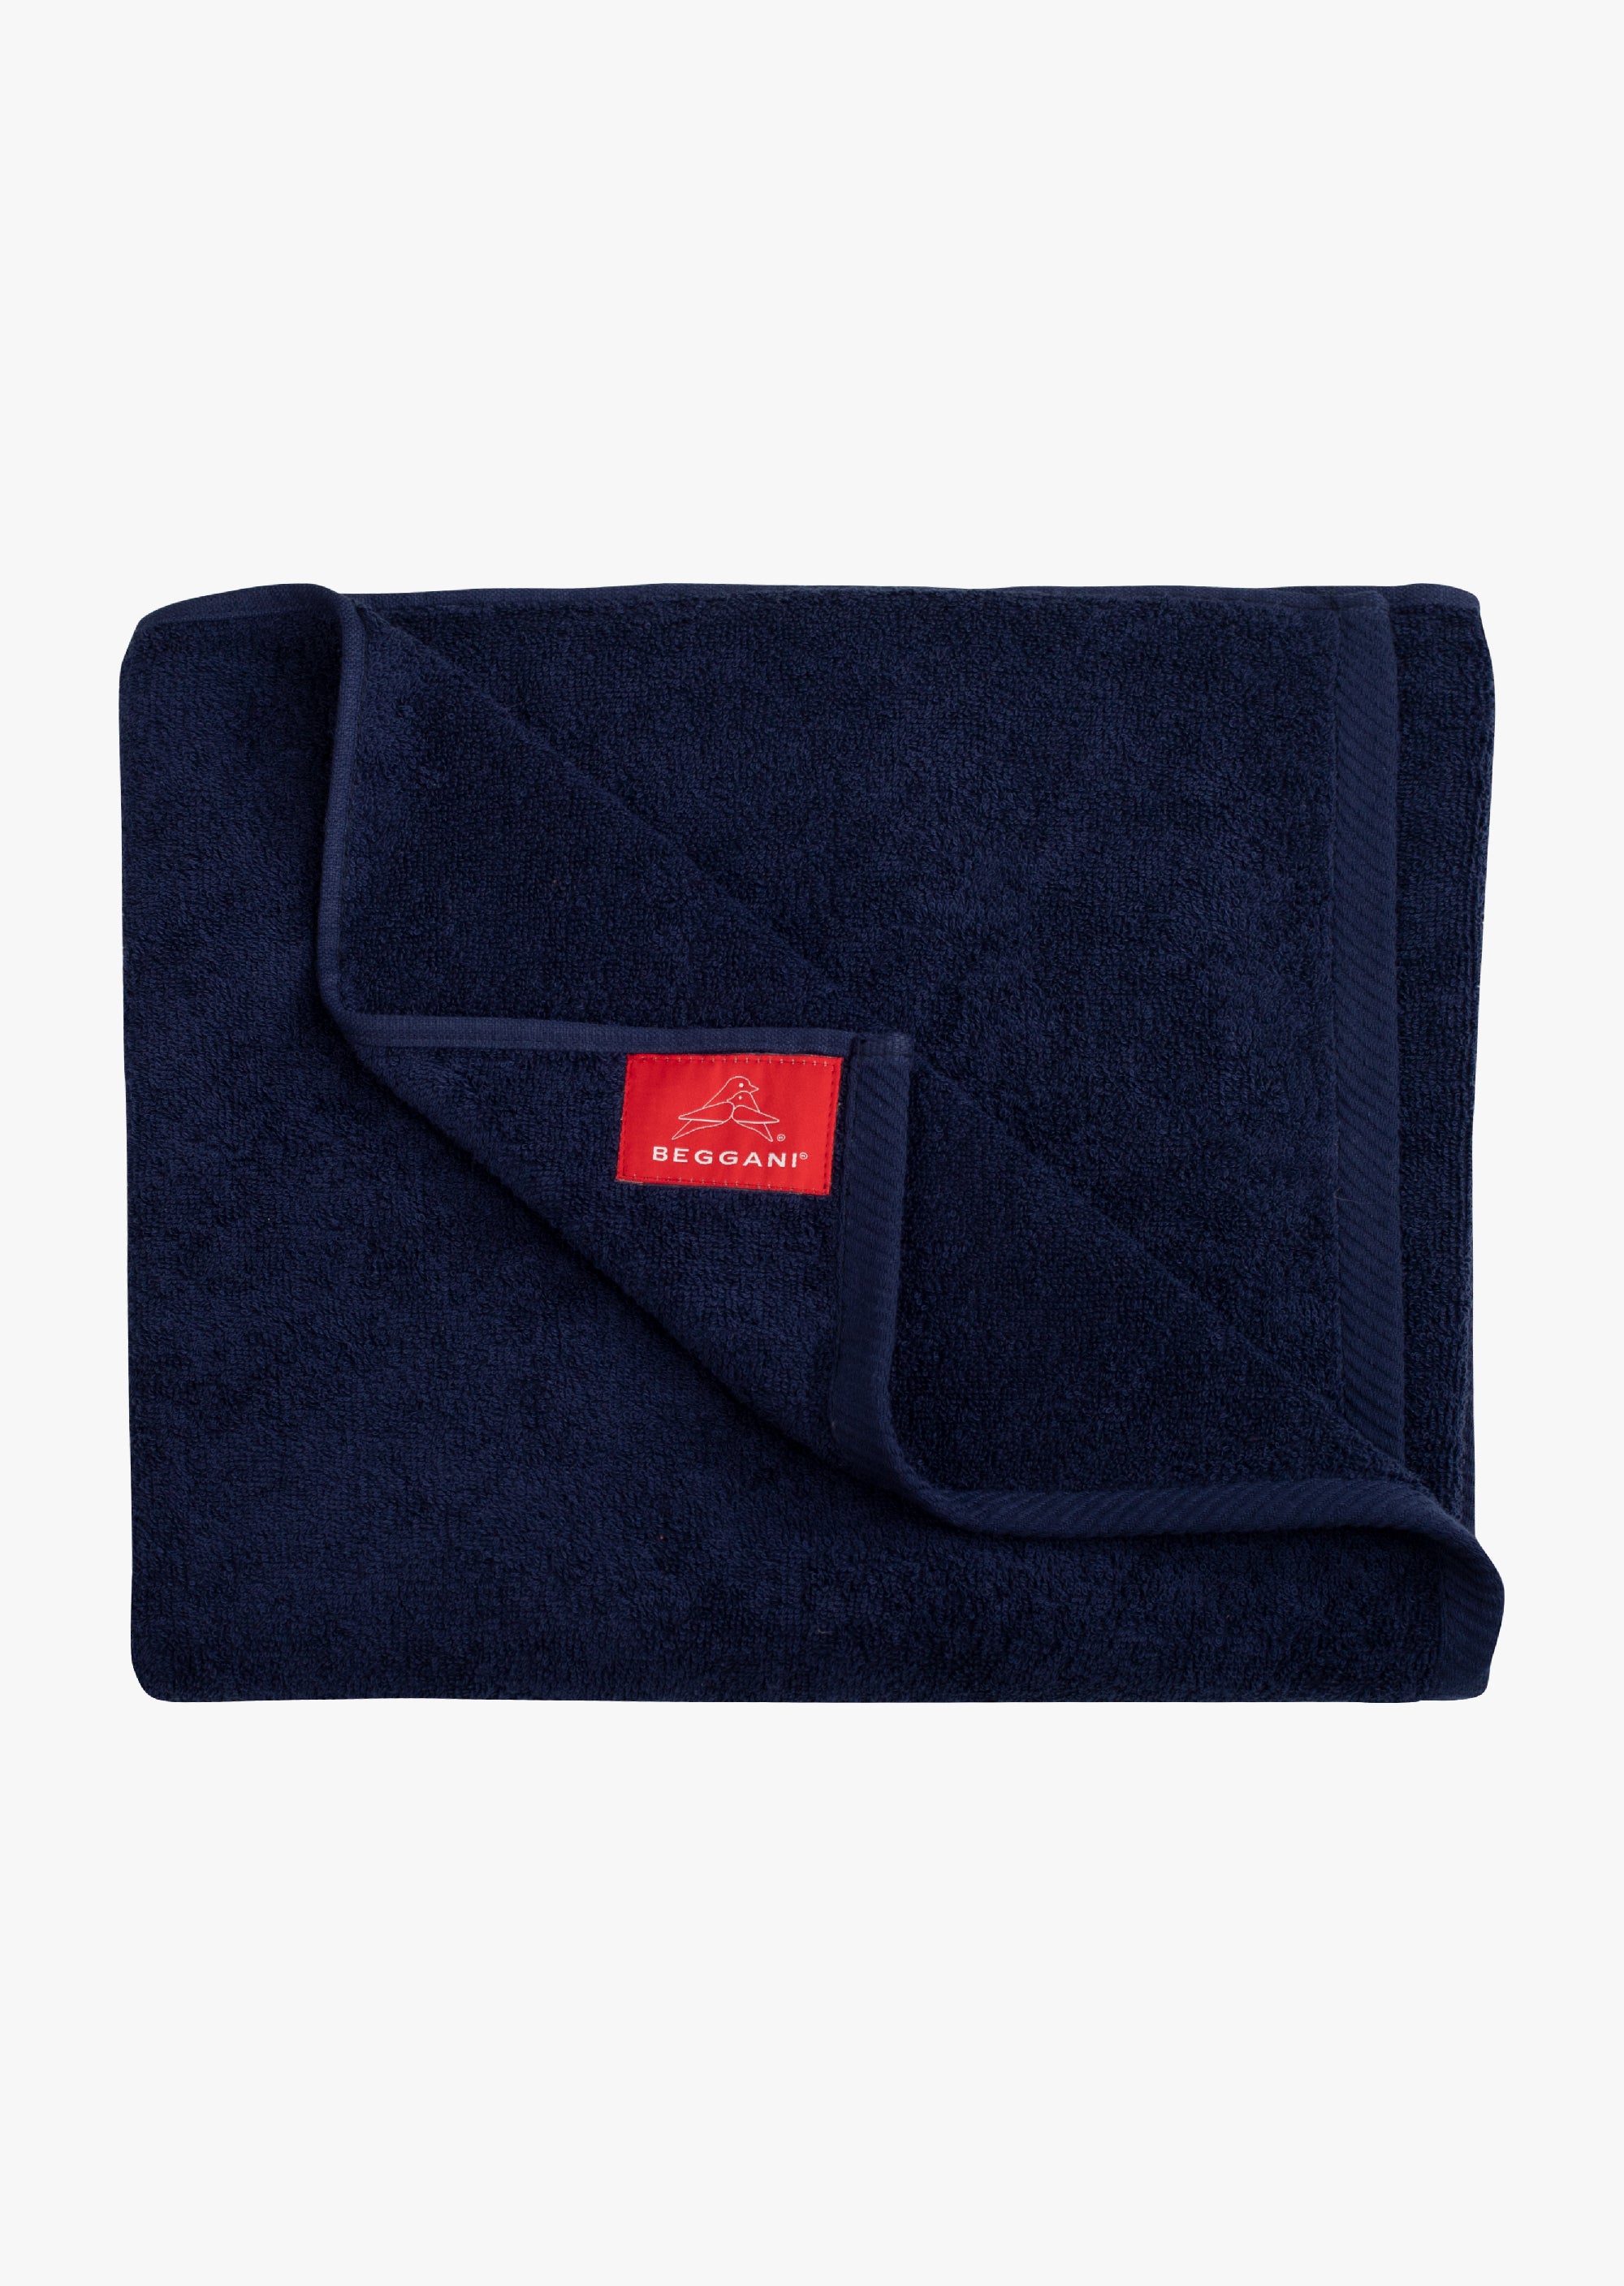 Towel of soft cotton with logo BEGGANI